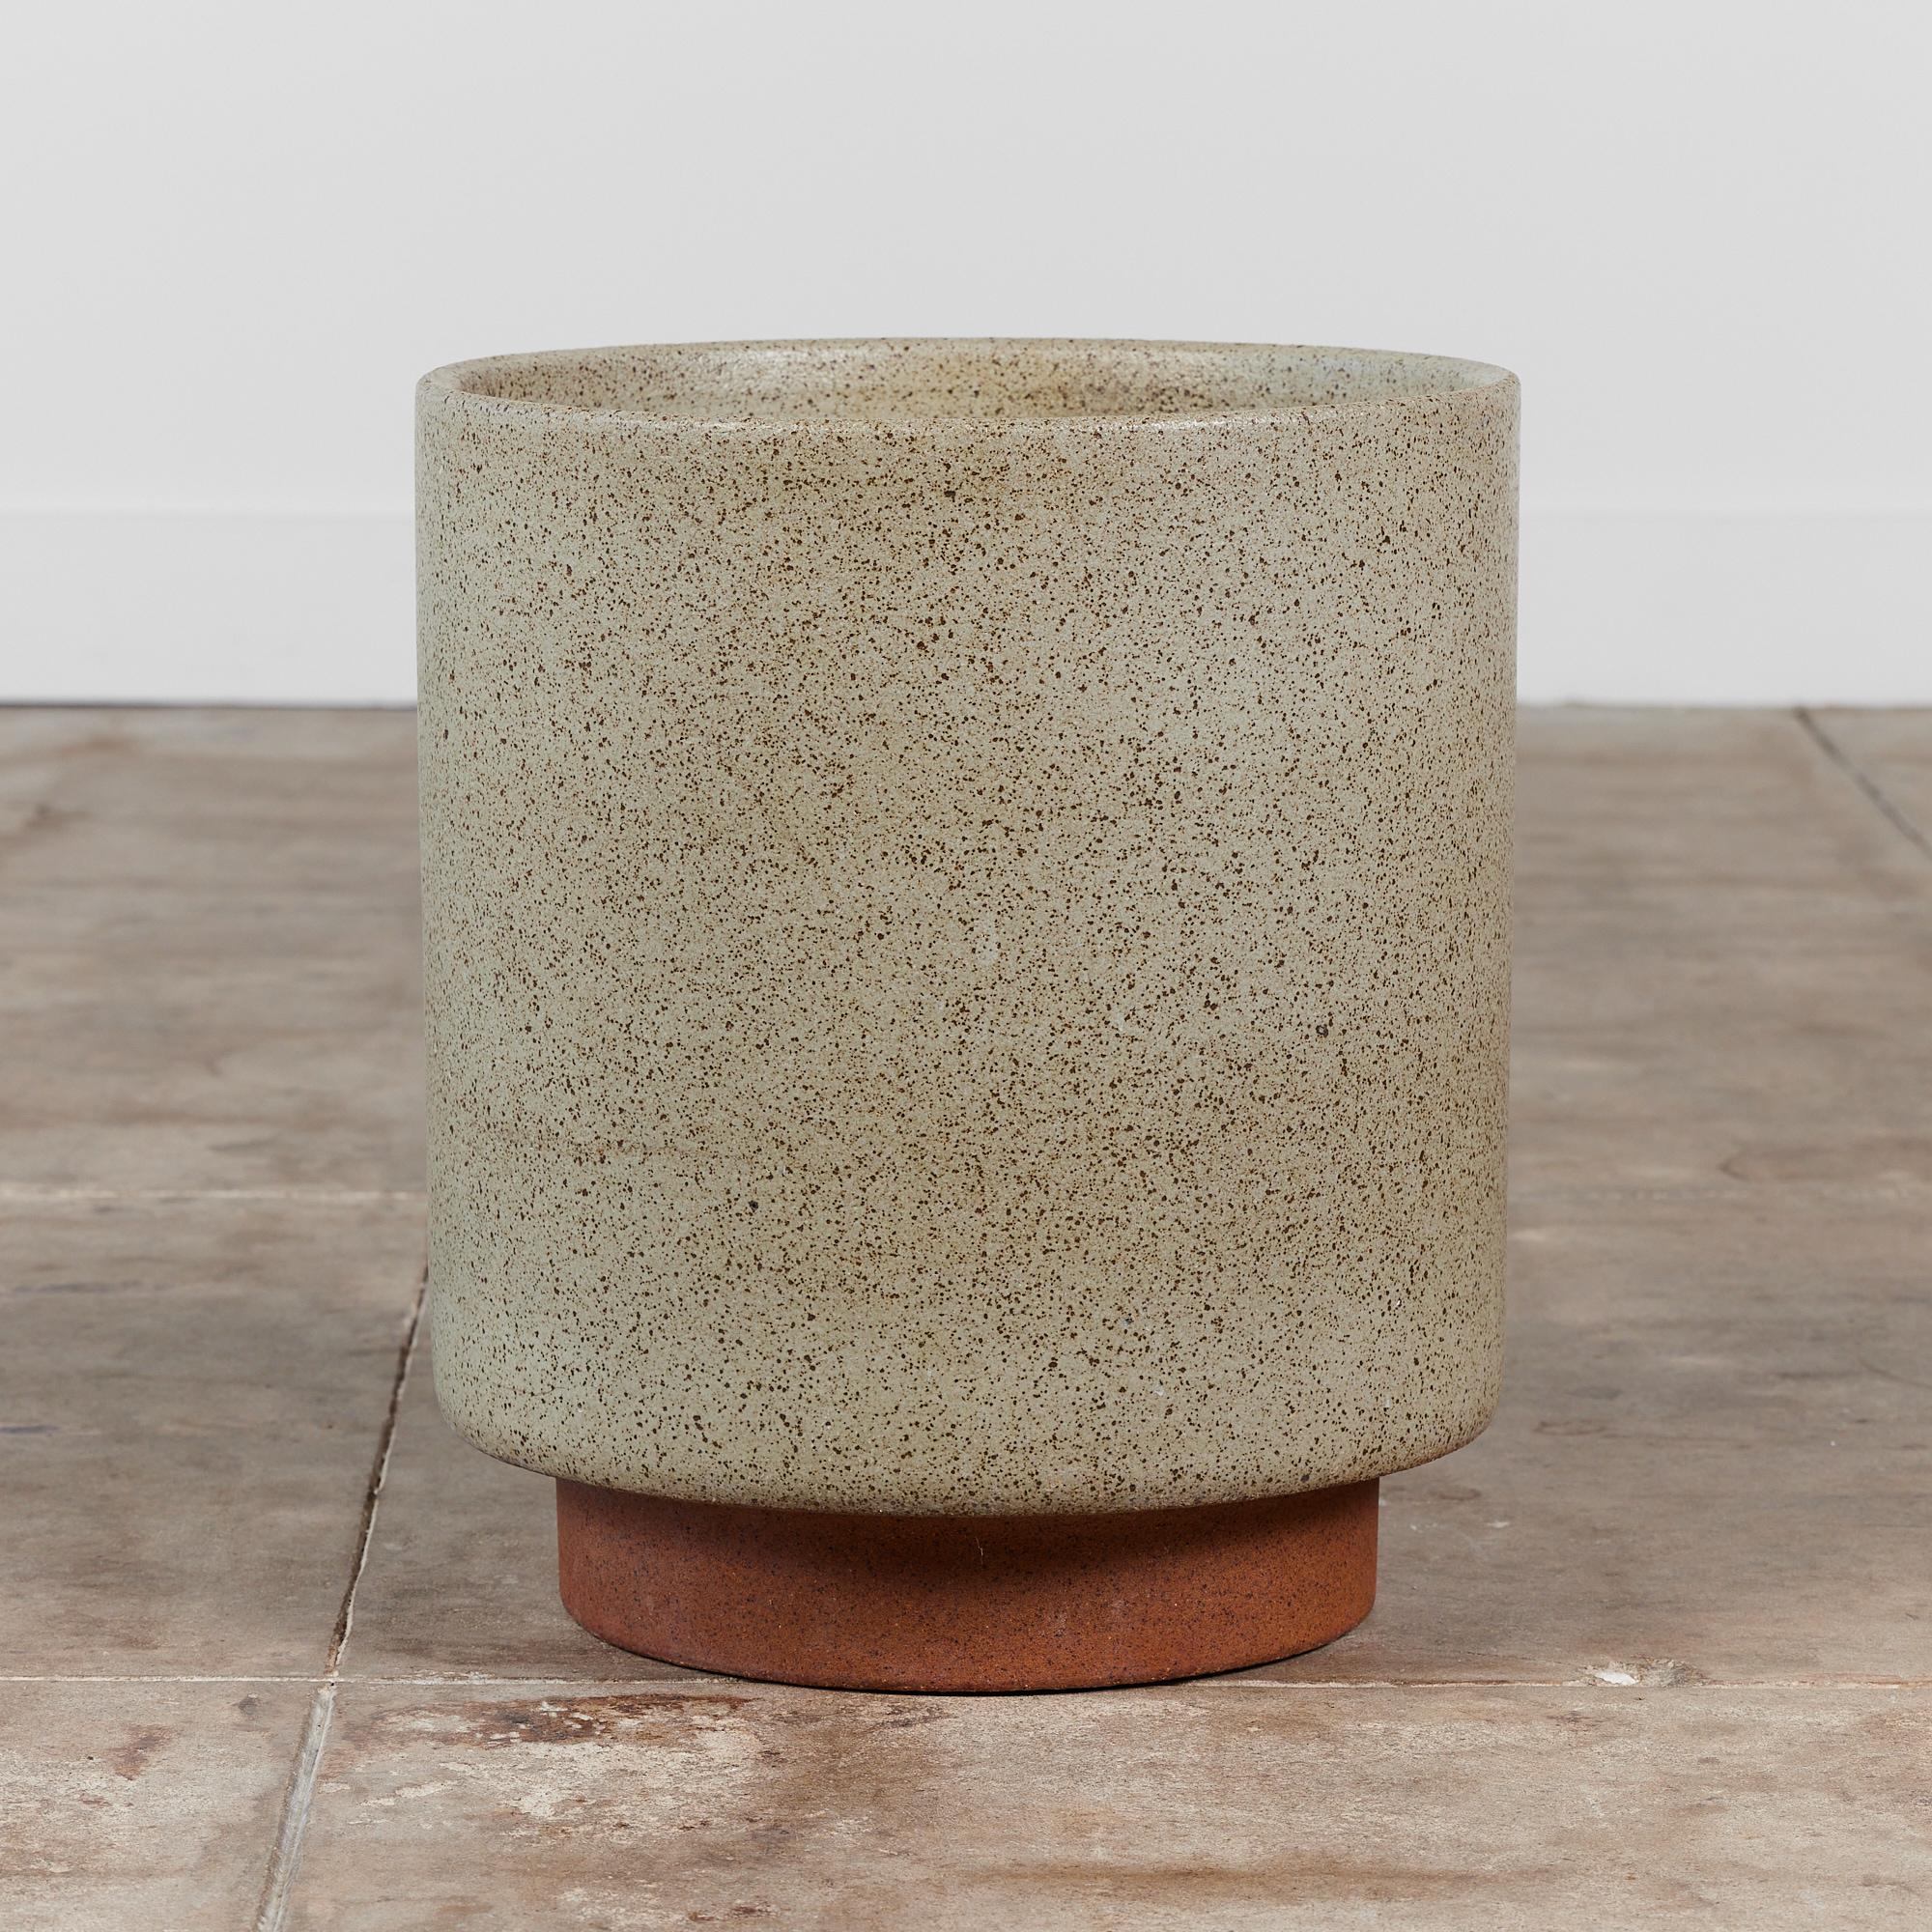 Ceramic planter from David Cressey's Pro / Artisan collection for Architectural Pottery. The 4043 / R cylindrical planter has a stone white speckle glazed exterior and interior, with rounded stoneware base. 

Dimensions
?17